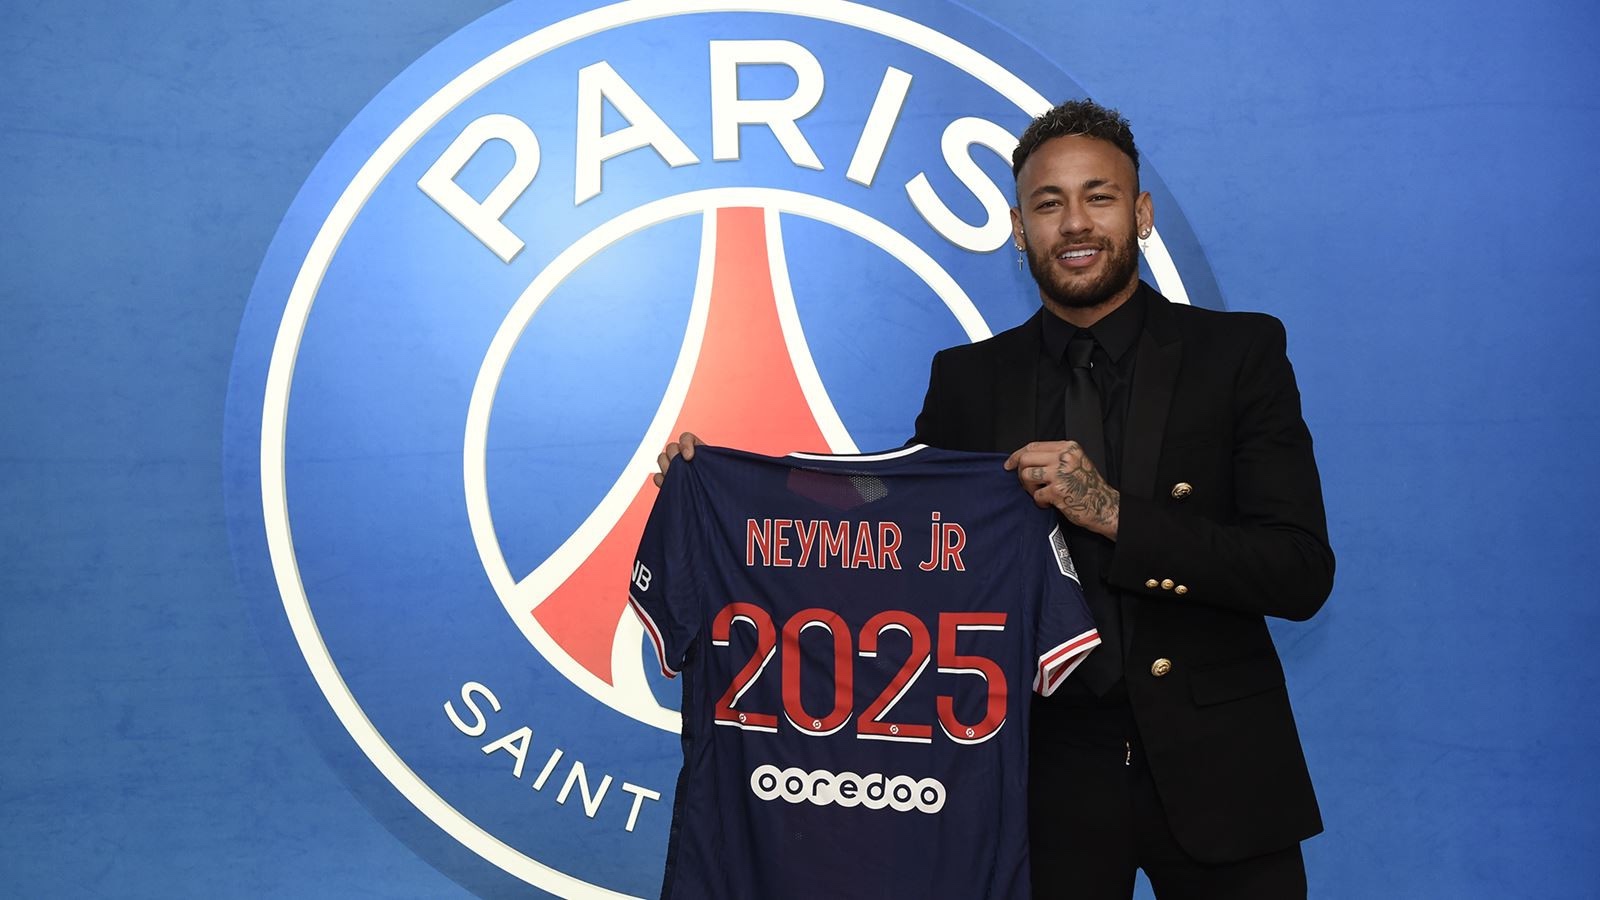 Neymar signs new contract extension with Paris Saint-Germain until 2025